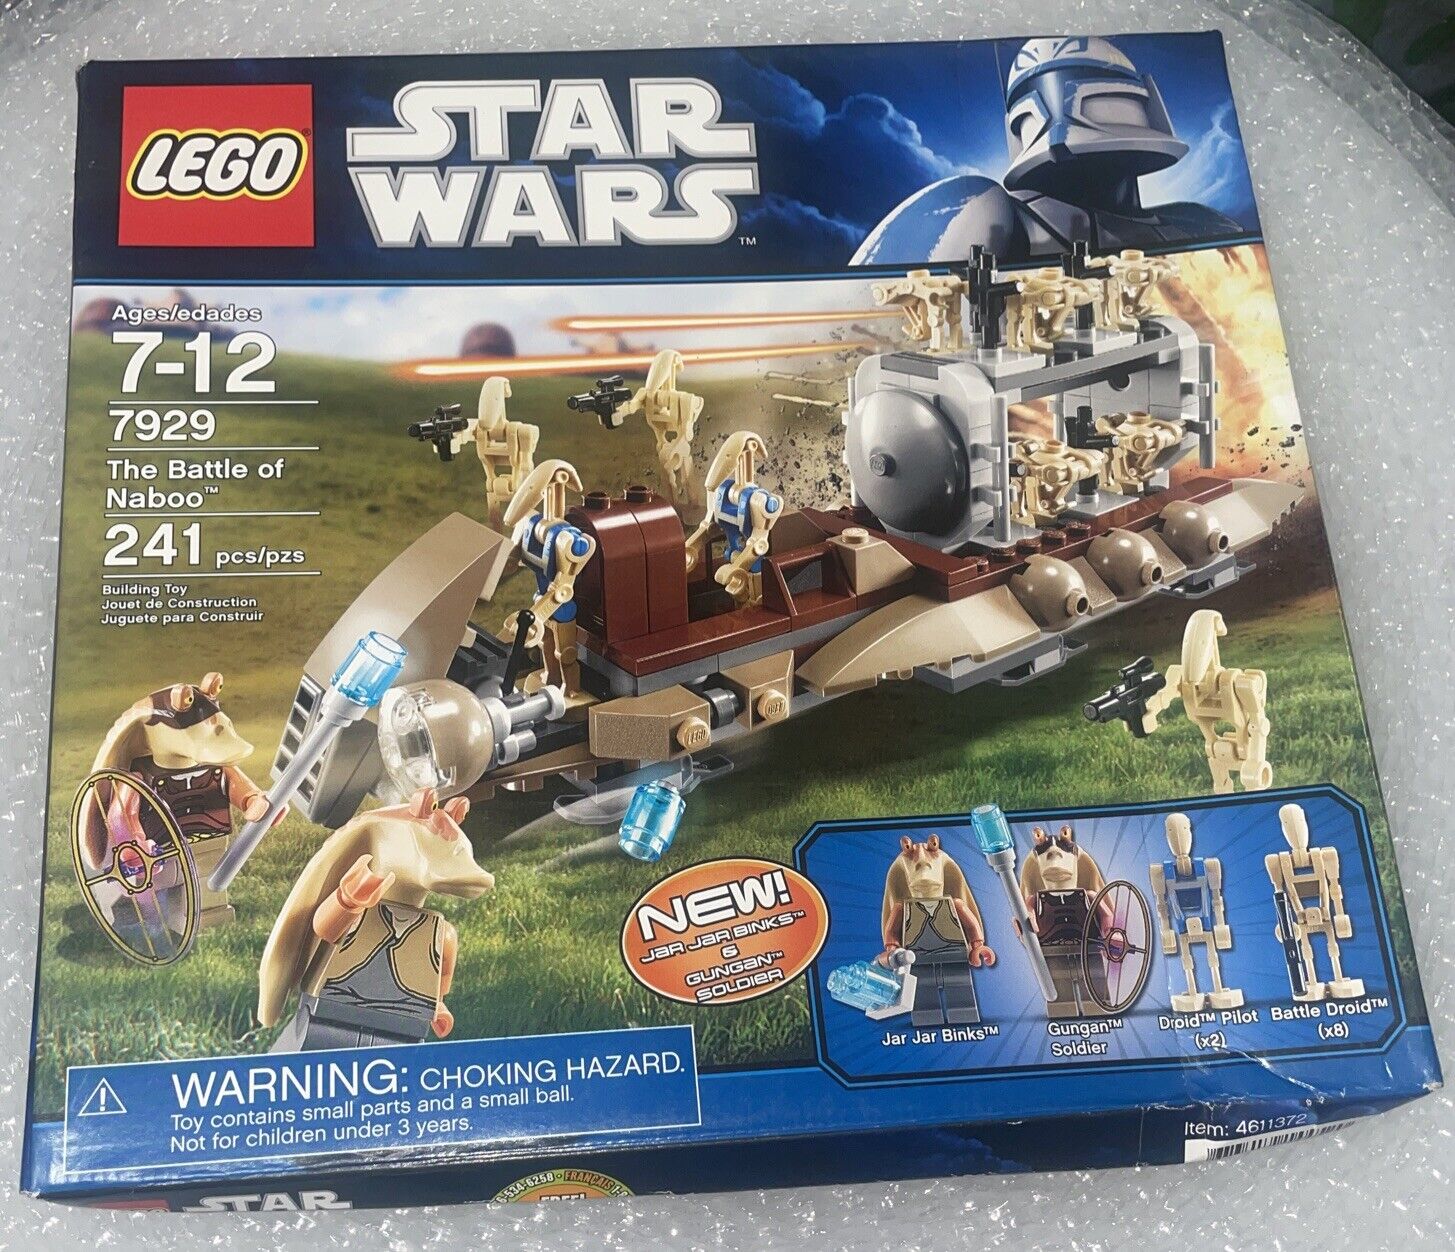 LEGO Star Wars: The Battle of Naboo (7929) Sealed New In Box Set Retired